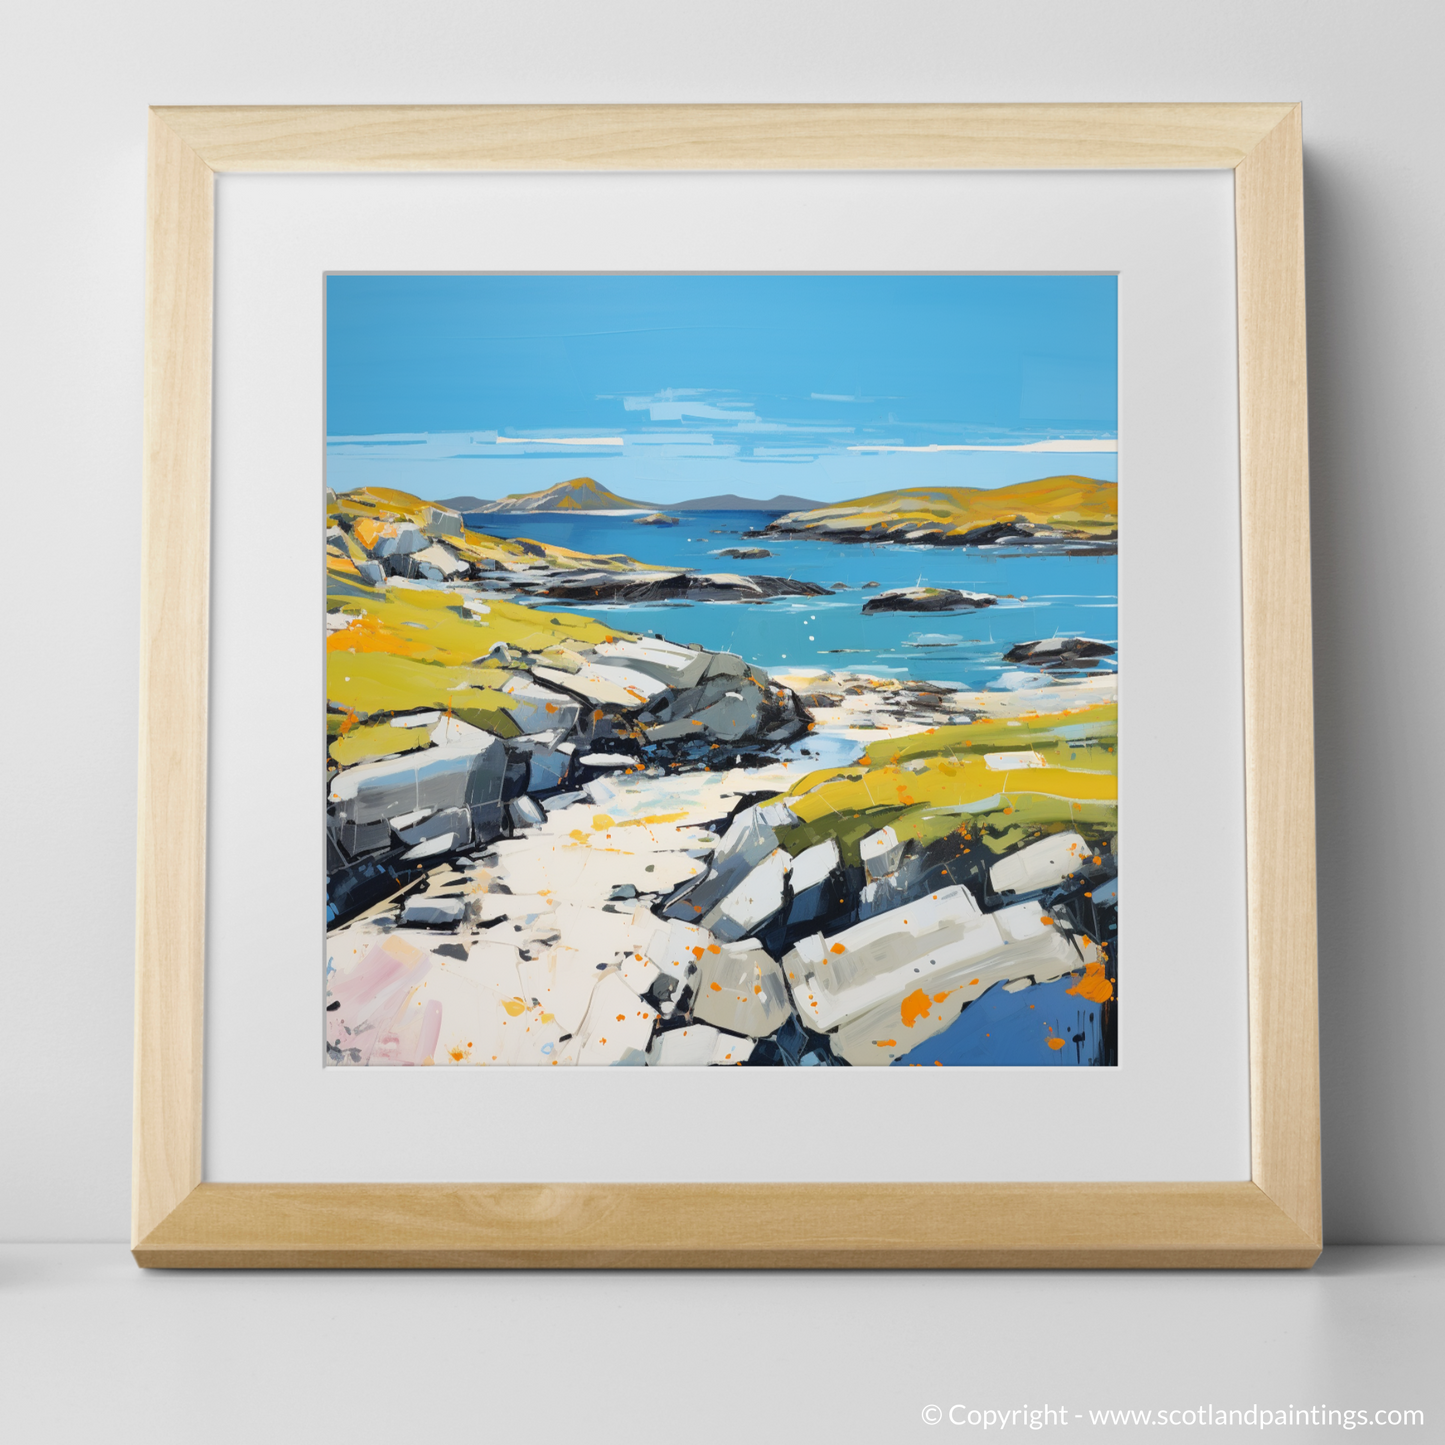 Art Print of Isle of Harris, Outer Hebrides in summer with a natural frame